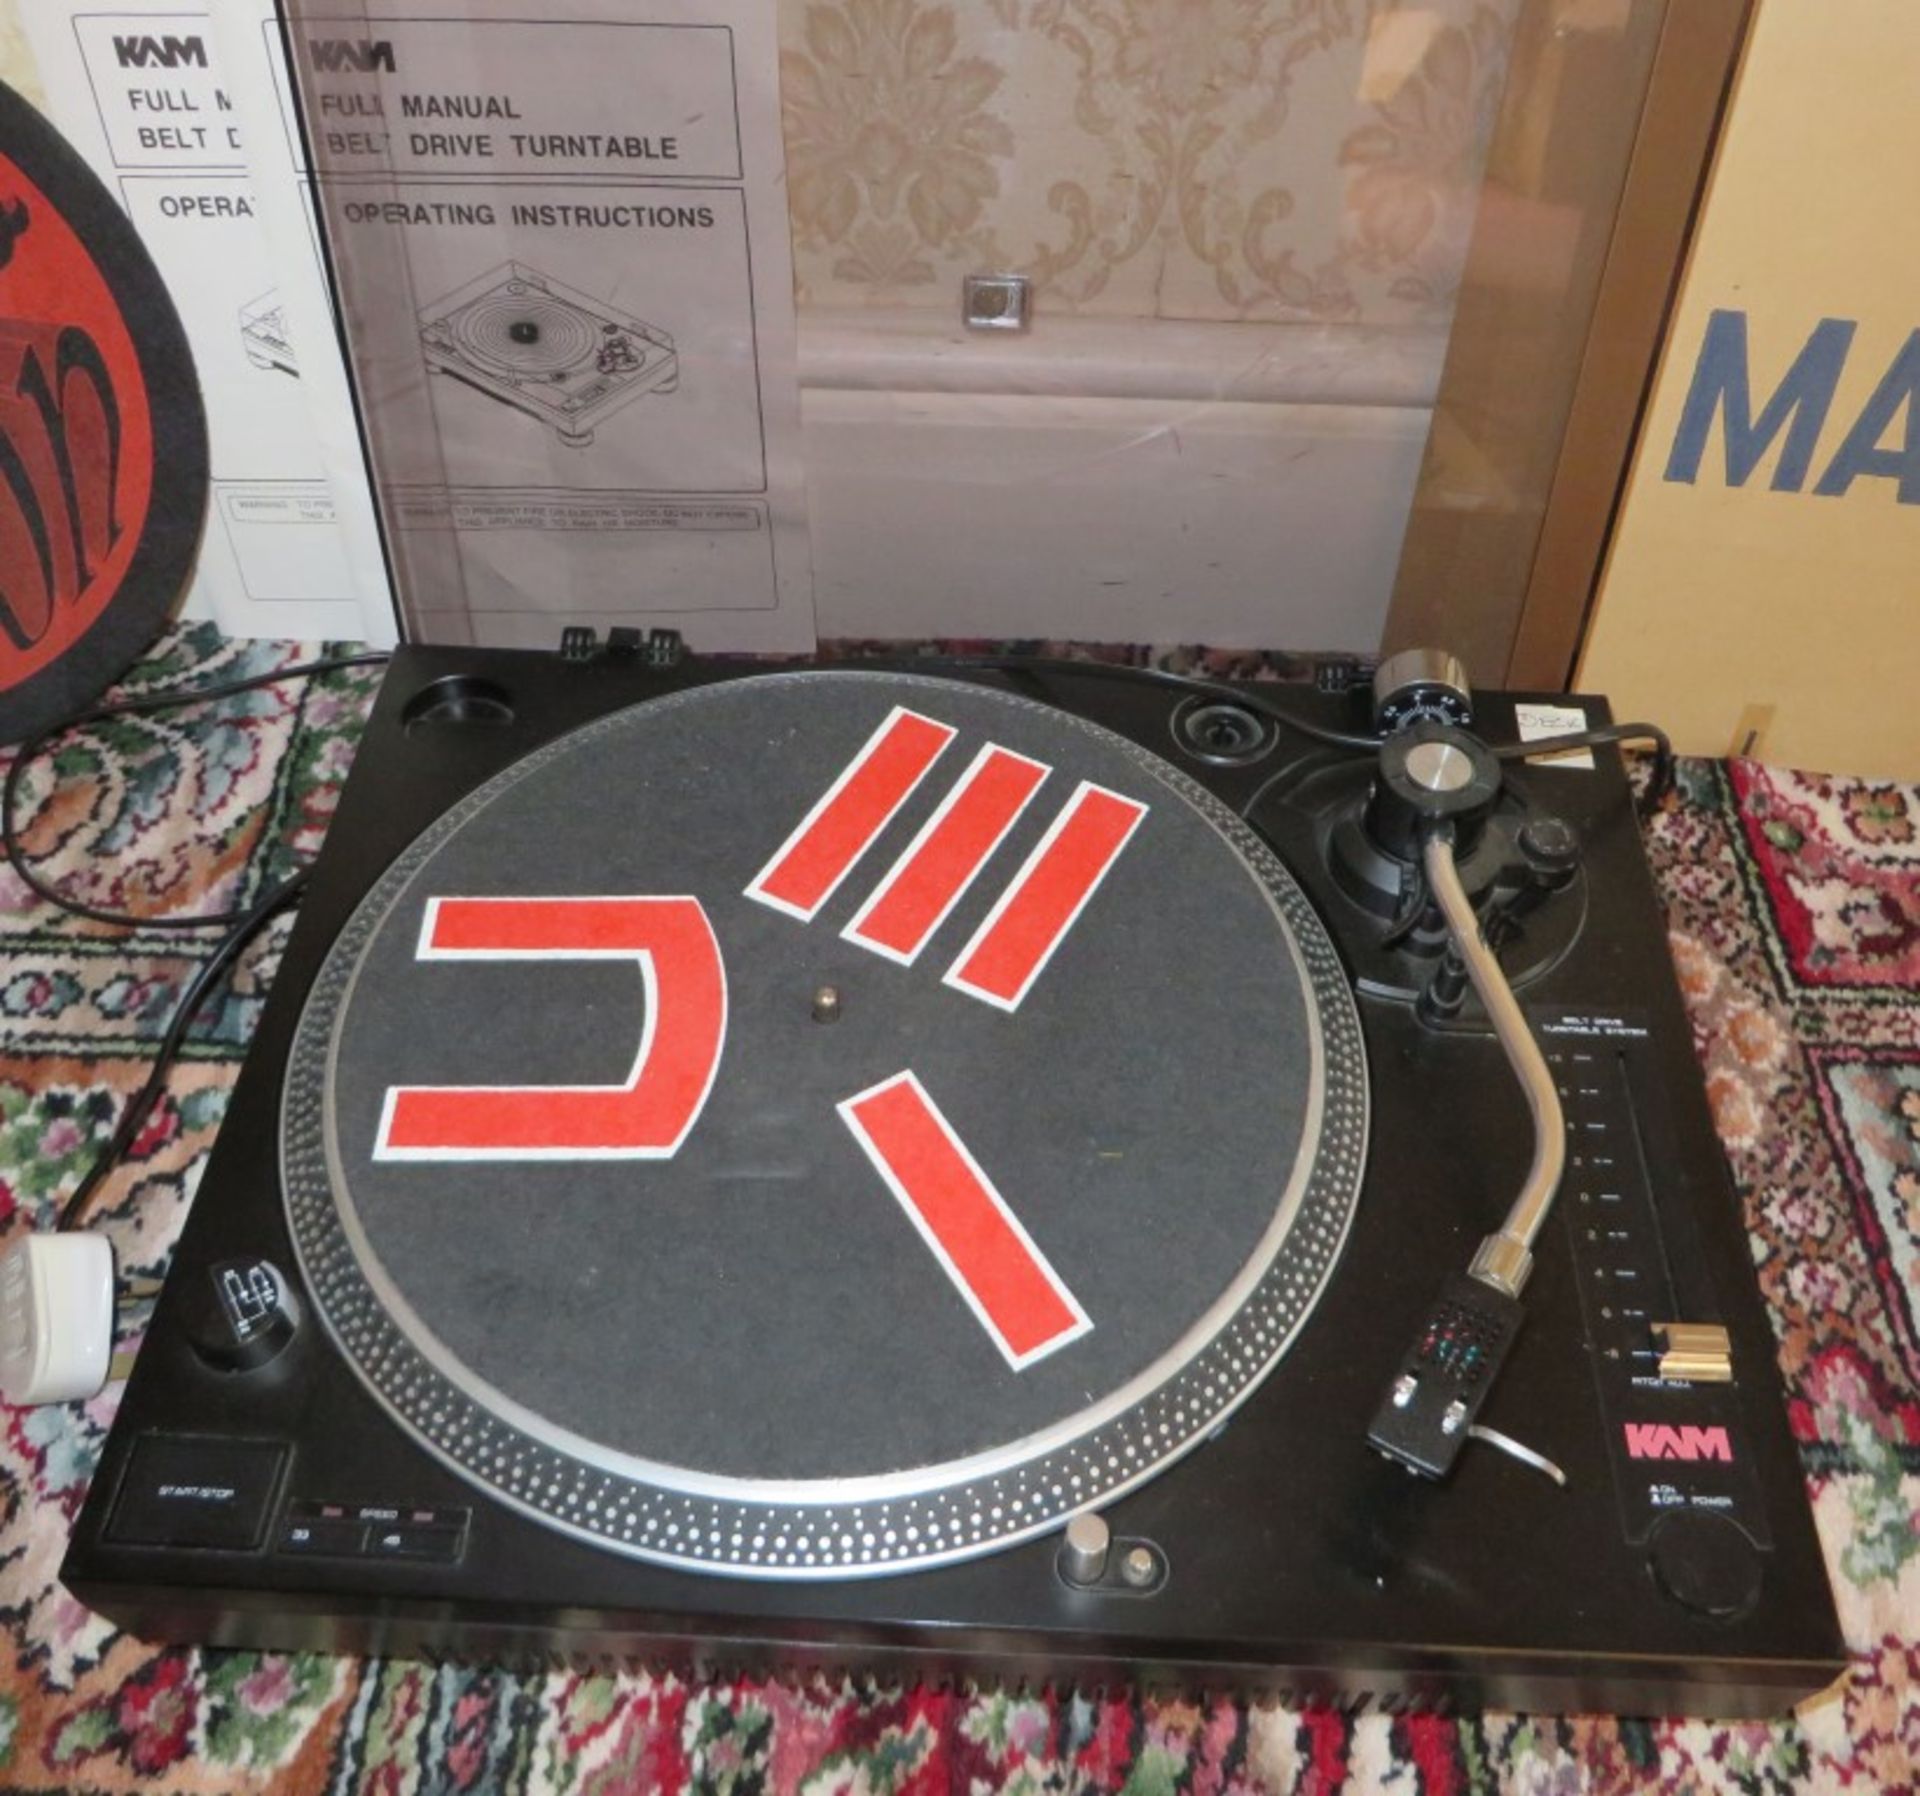 A Pair Of KAM Branded Full Manual Belt Drive Turntables / Decks - Both Preowned In Working Condition - Image 2 of 5